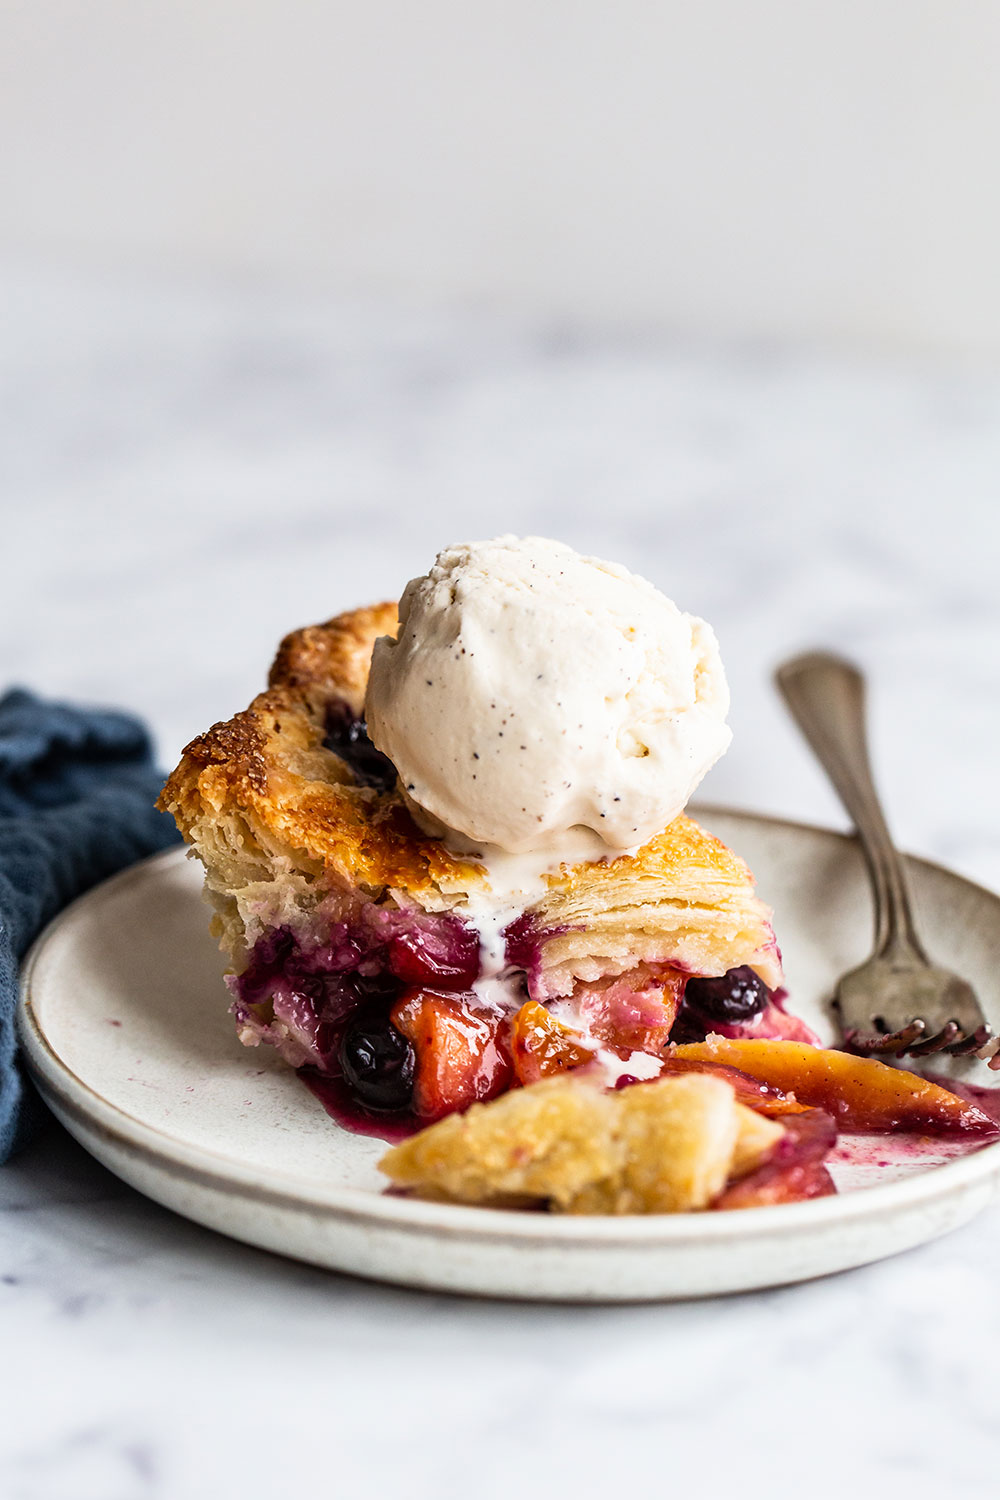 slice of blueberry peach pie with flaky crust, topped with a scoop of vanilla ice cream